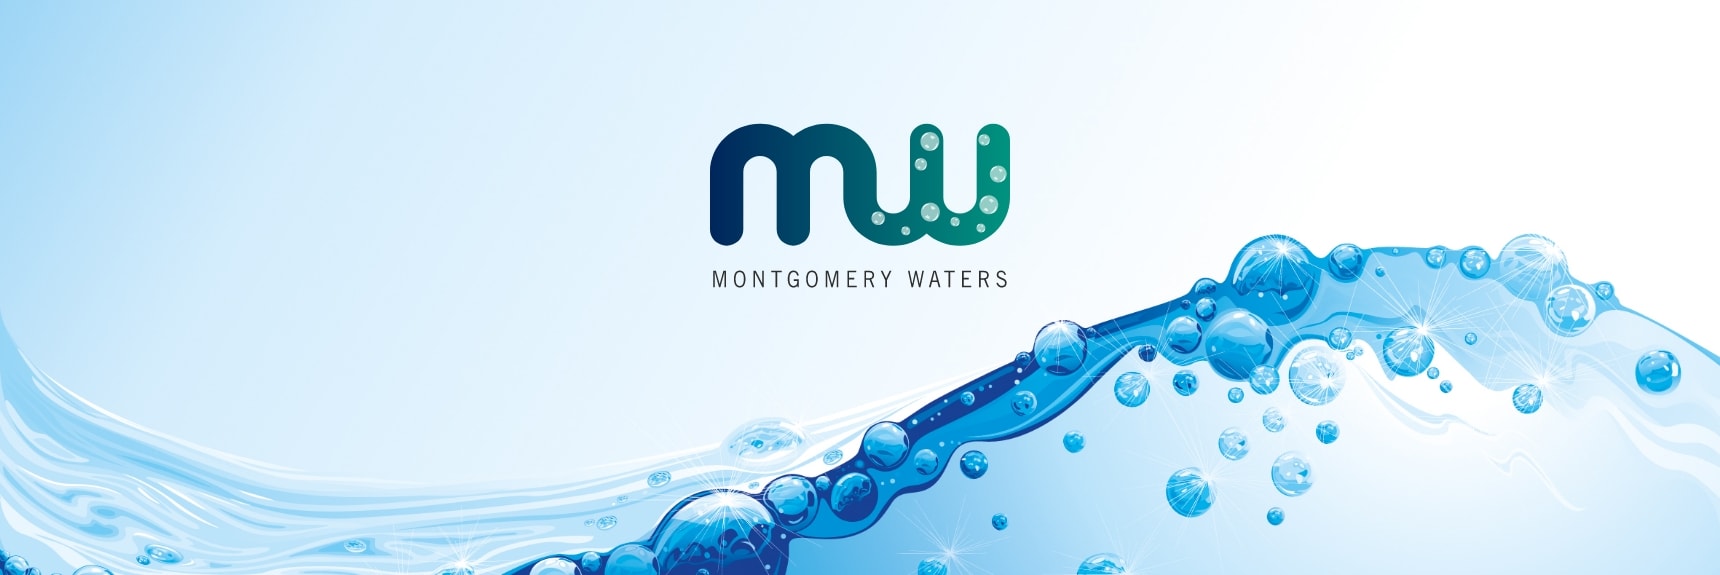 Montgomery Waters